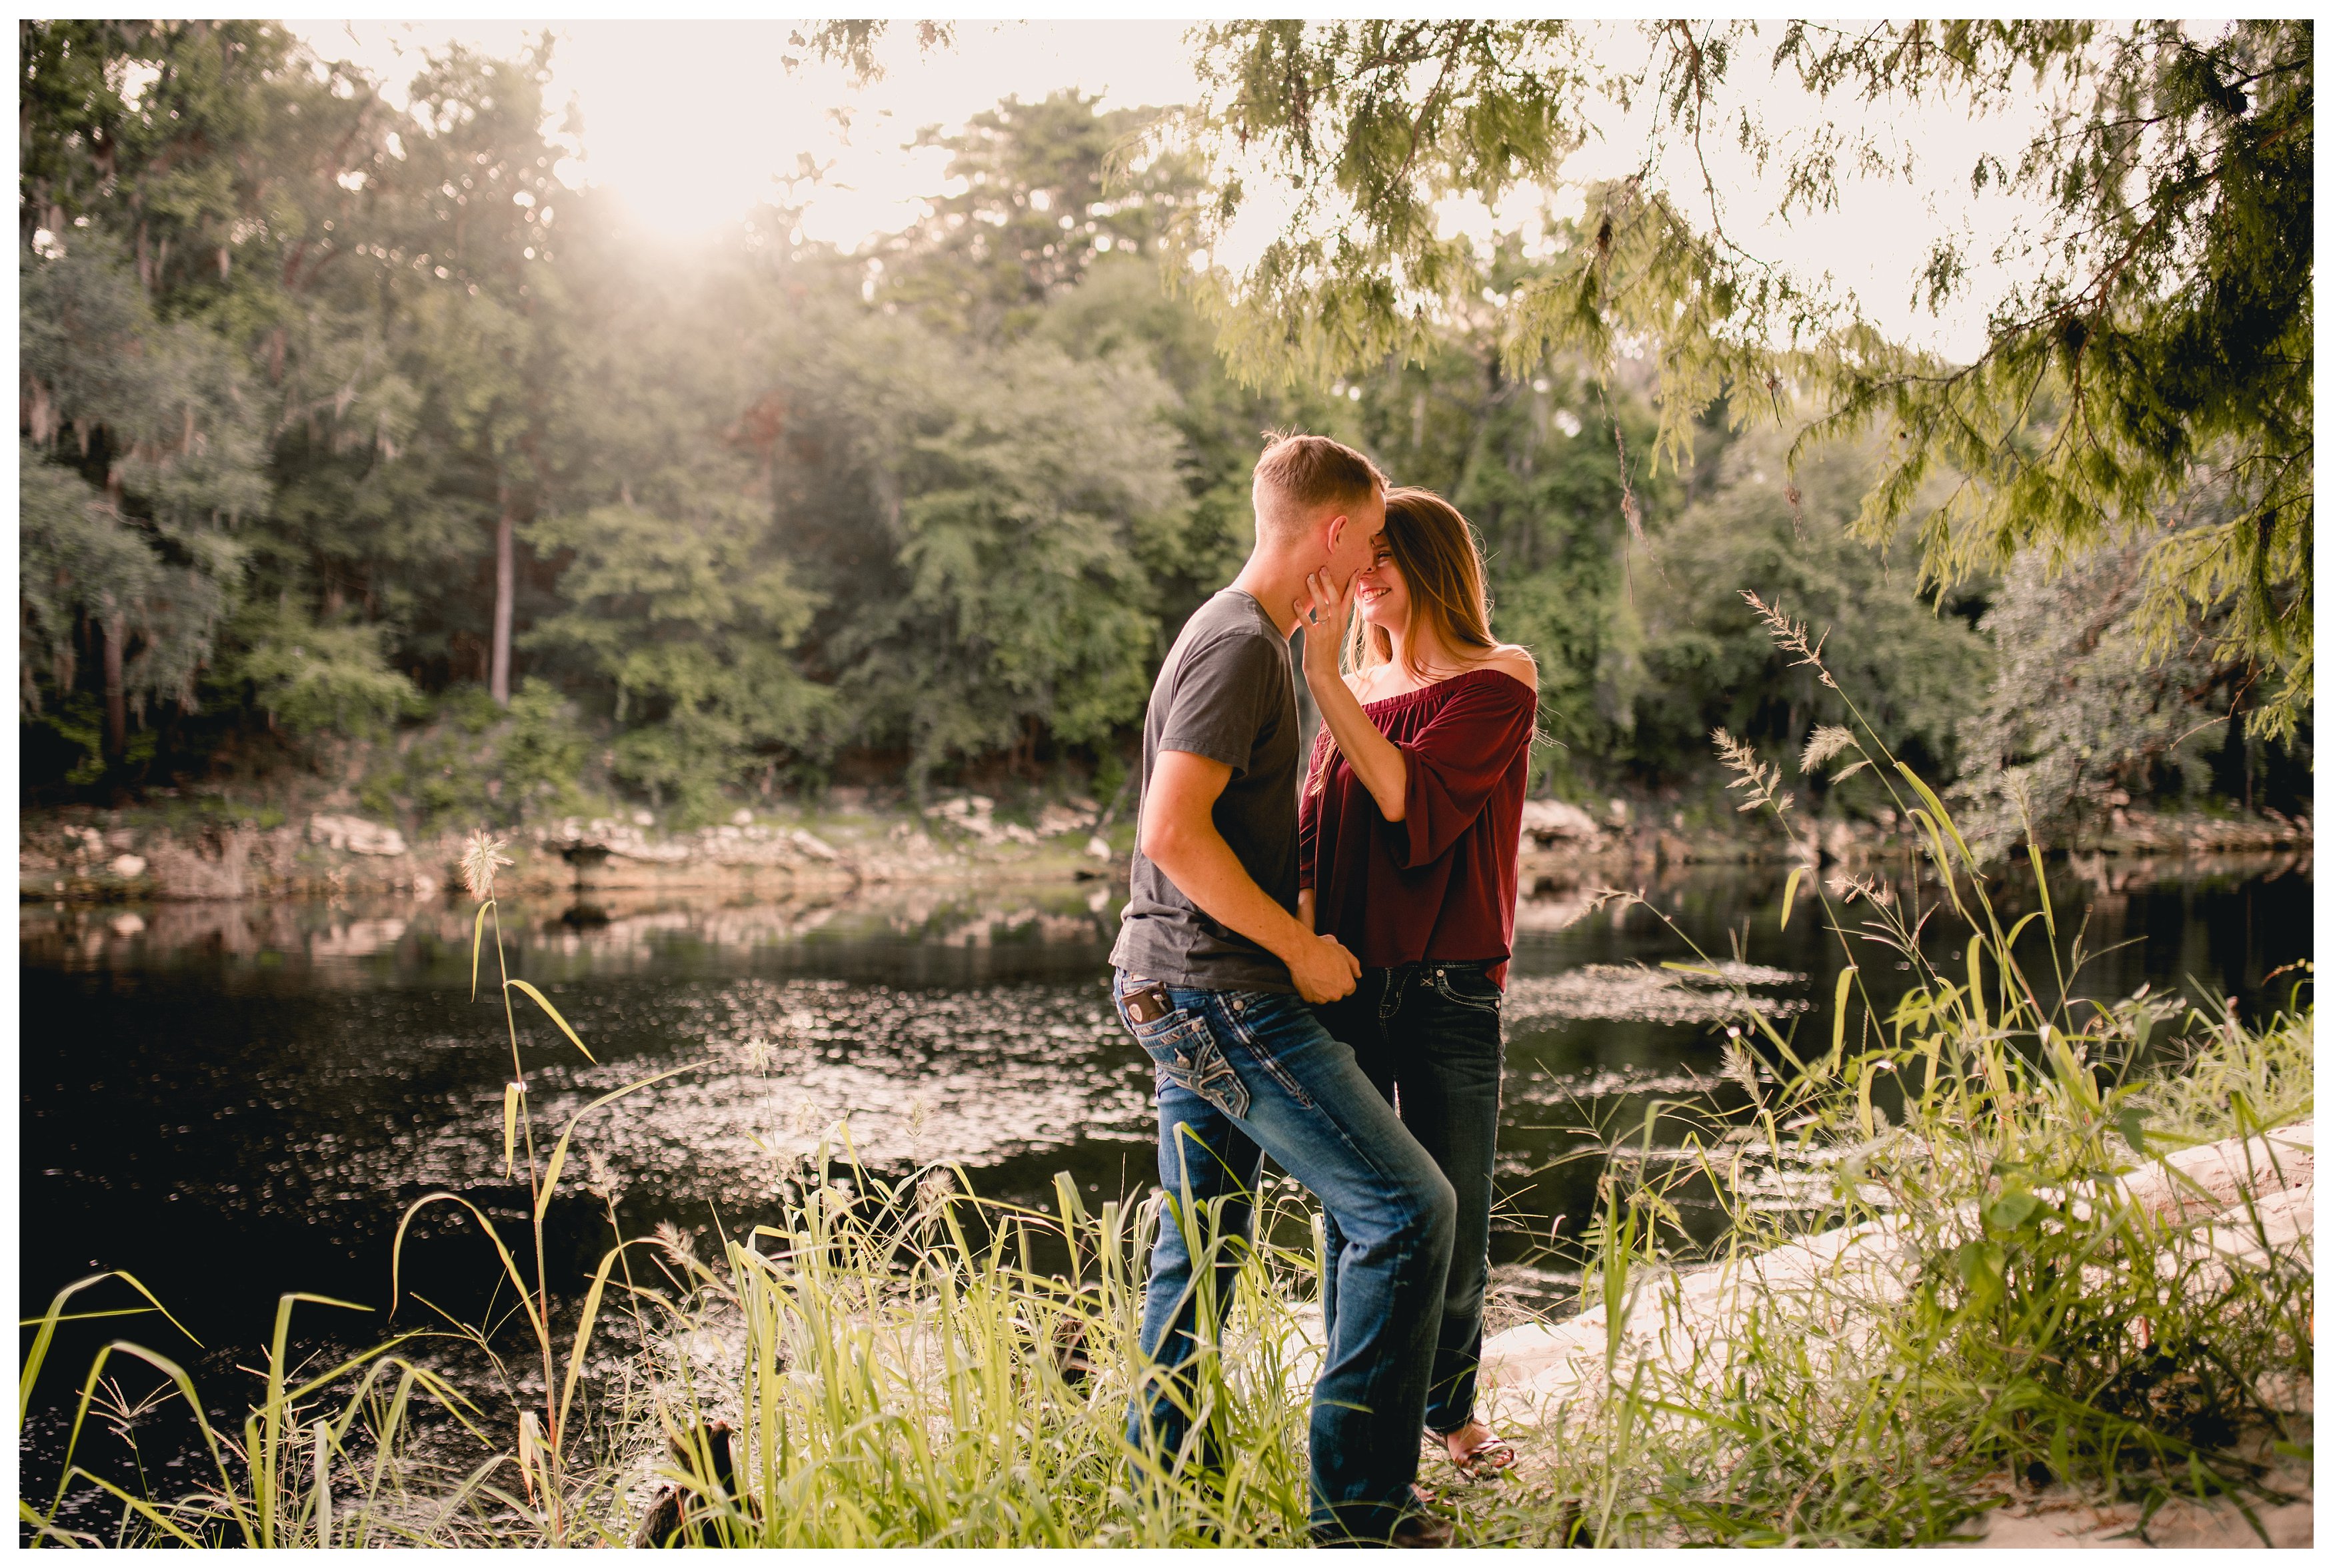 Engagement pictures taken along the Suwannee River in North Florida.